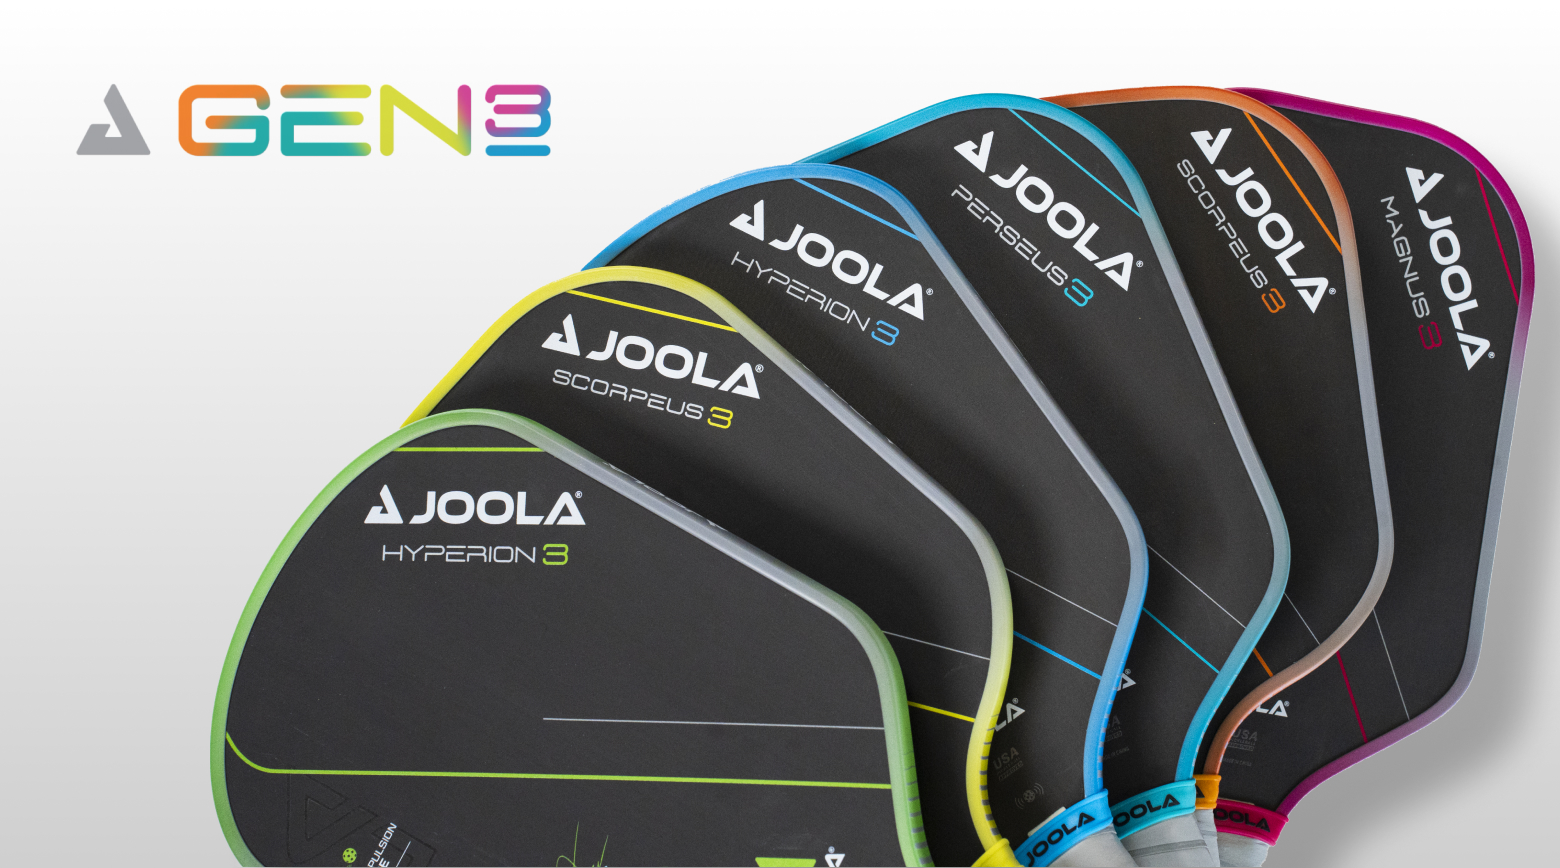 JOOLA Launches Gen 3 Paddle Line-Up Featuring Revolutionary Technology